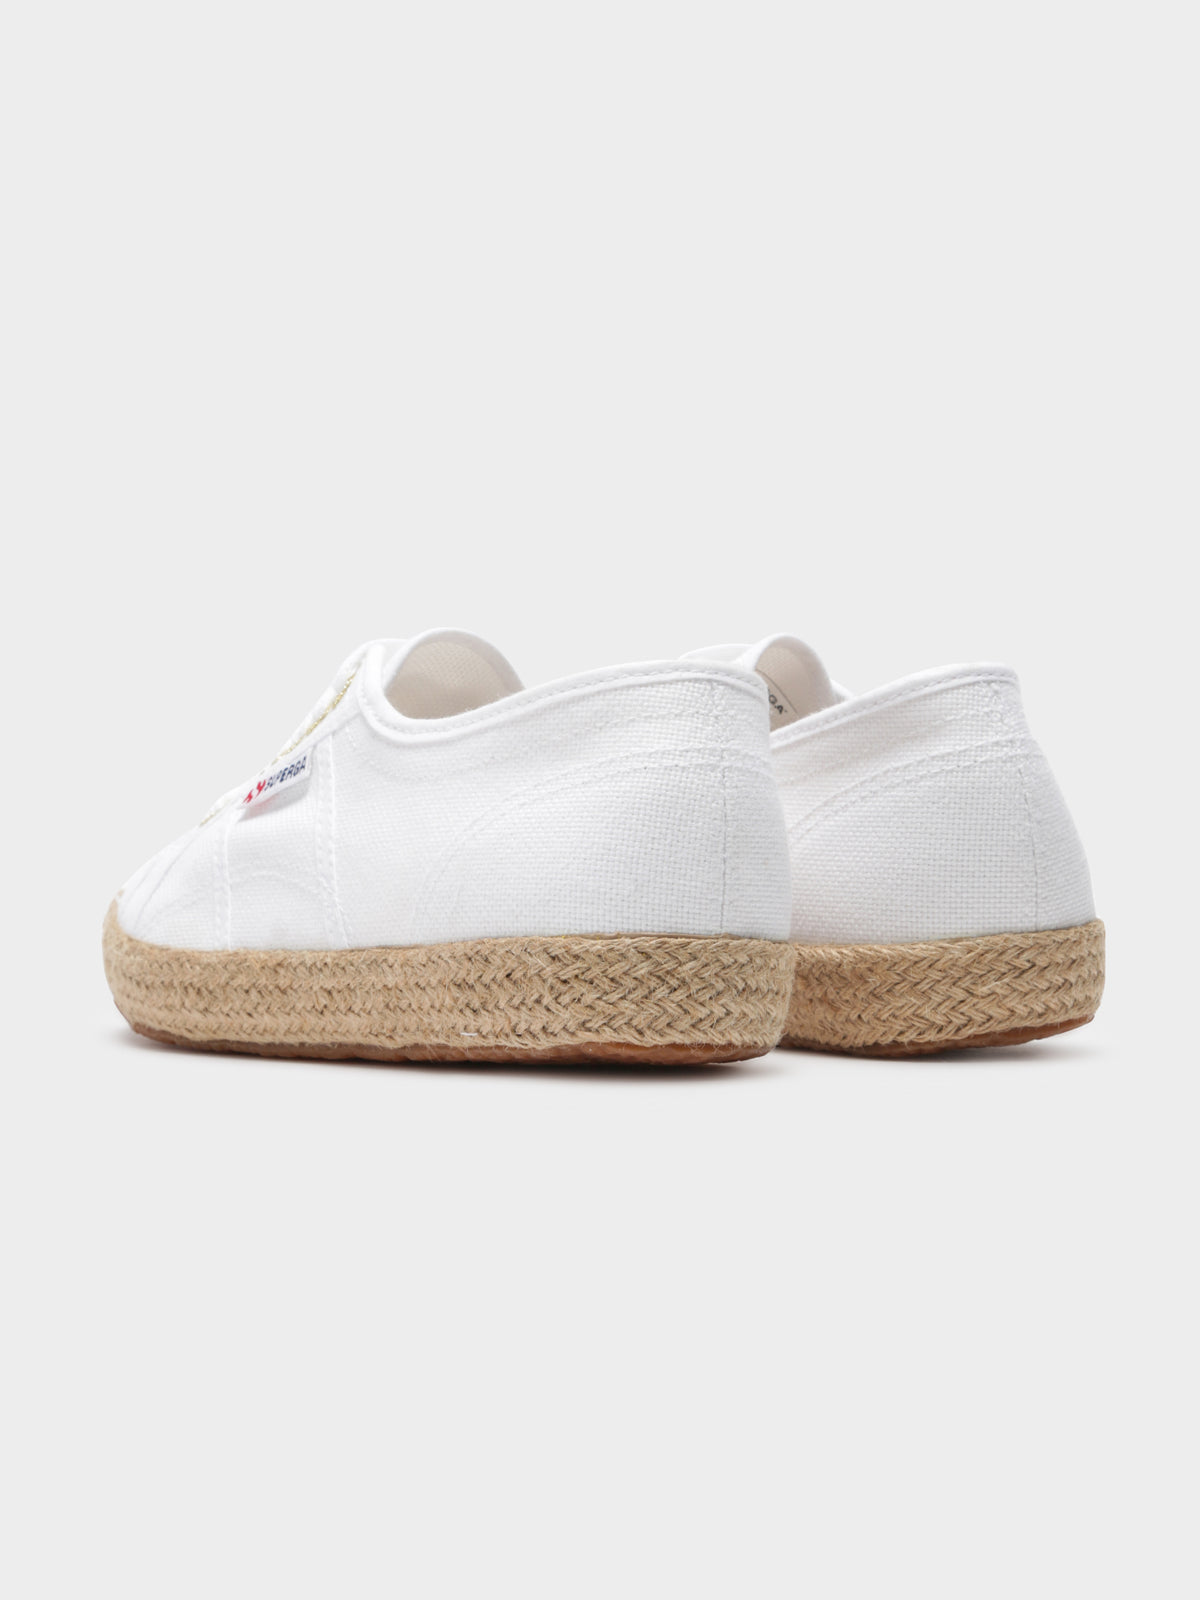 Womens 2750 Cotropeu Sneakers in White